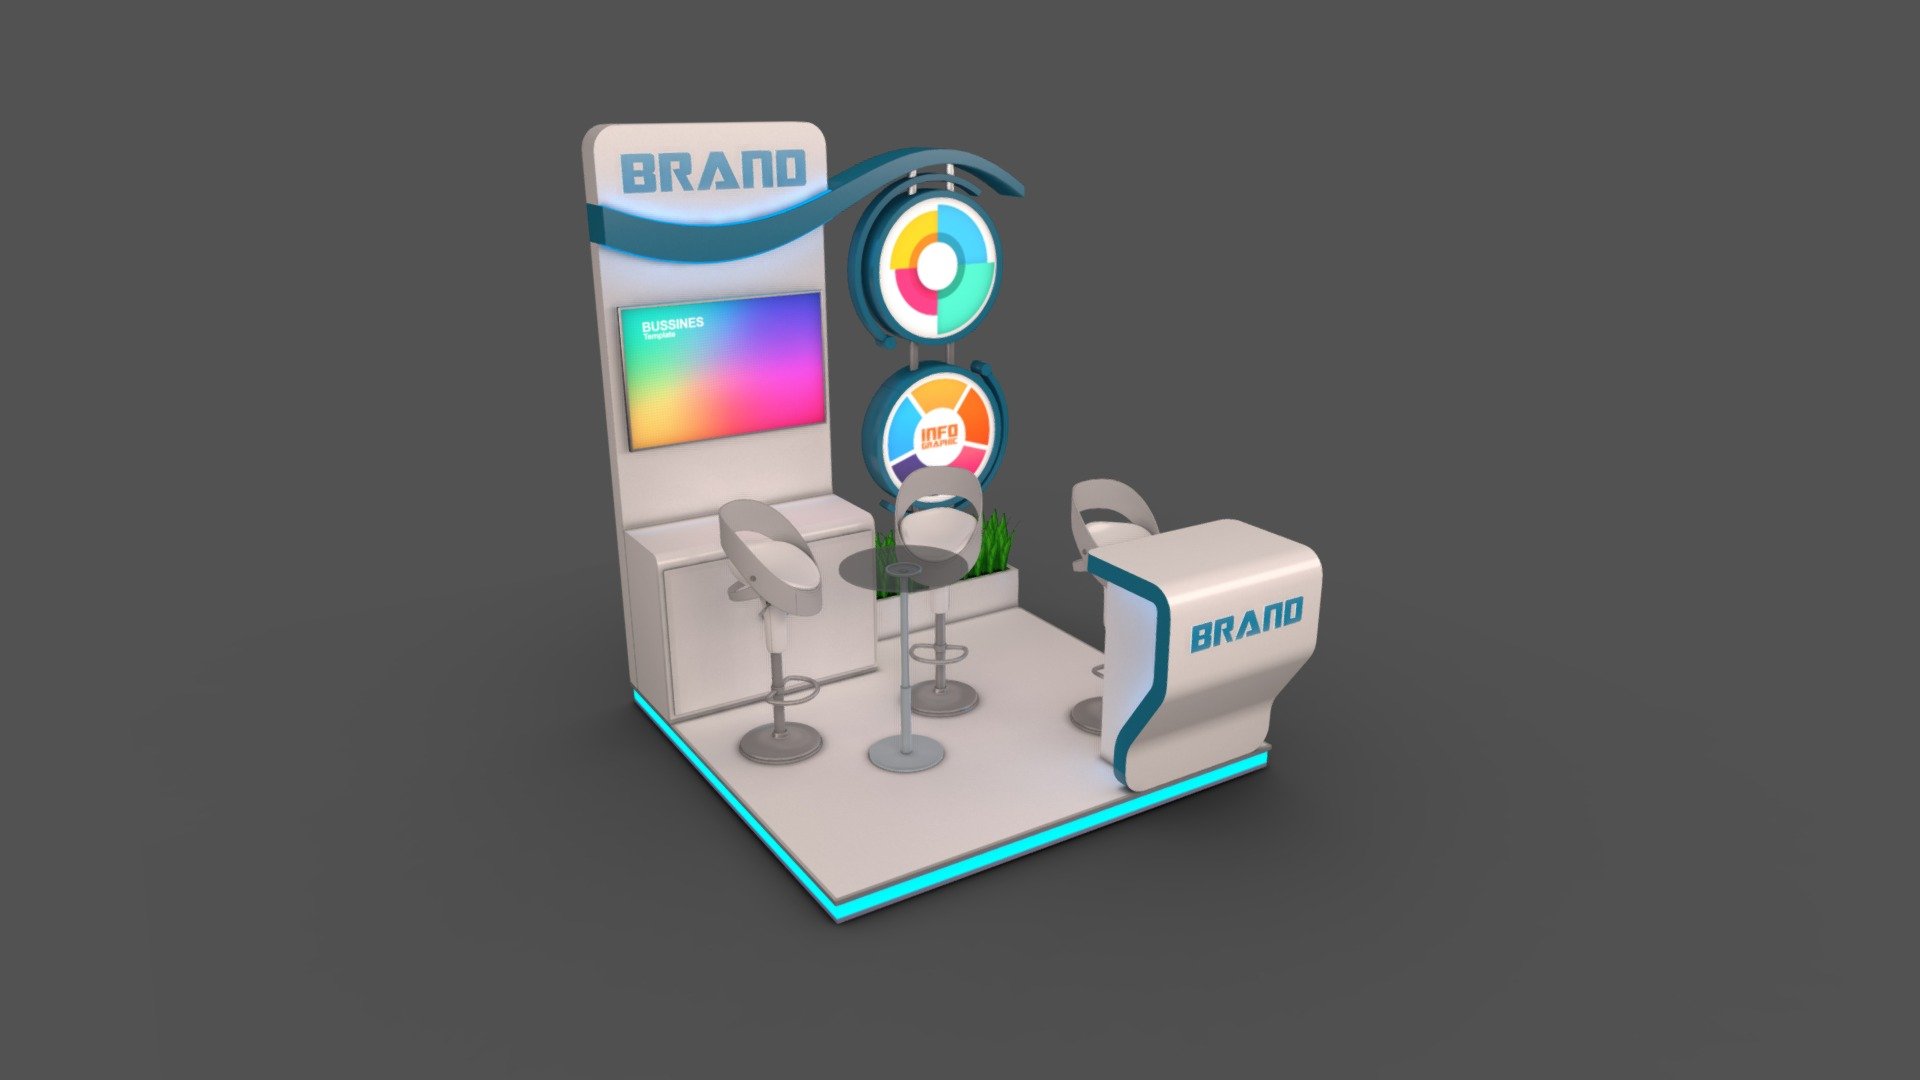 Exhibition Booth 3D Model

Layout: 4 Sqm - 3 Exposed sides - max height: 2,5m

Unit: cm

3D model Format:





Model_2302_3Ds max 2020 / Vray 5




Model_2302_3Ds max 2017 / Default Render




Model_2302_Fbx Standard map




Model_2302_Fbx V ray complete map




Model_2302_Obj Standard map




Model_2302_Obj V ray complete map



thank you for visiting

If you are interested in other models, please visit my collection



EXHIBITION STAND 36 Sqm
https://sketchfab.com/fasih.lisan/collections/exhibition-stand-36-sqm-34b6419aa7ec4556b18d8a381c51db77

EXHIBITION STAND 18 Sqm
https://sketchfab.com/fasih.lisan/collections/exhibition-stand-18-sqm-9a22add1012e4c36961b6e1db26a0280

EXHIBITION STAND 9 sqm
https://sketchfab.com/fasih.lisan/collections/exhibition-stand-9-sqm-2afc738a25634768ba5335da876876f2 - Model 2302 Exhibition Booth 4 Sqm - Buy Royalty Free 3D model by fasih.lisan 3d model